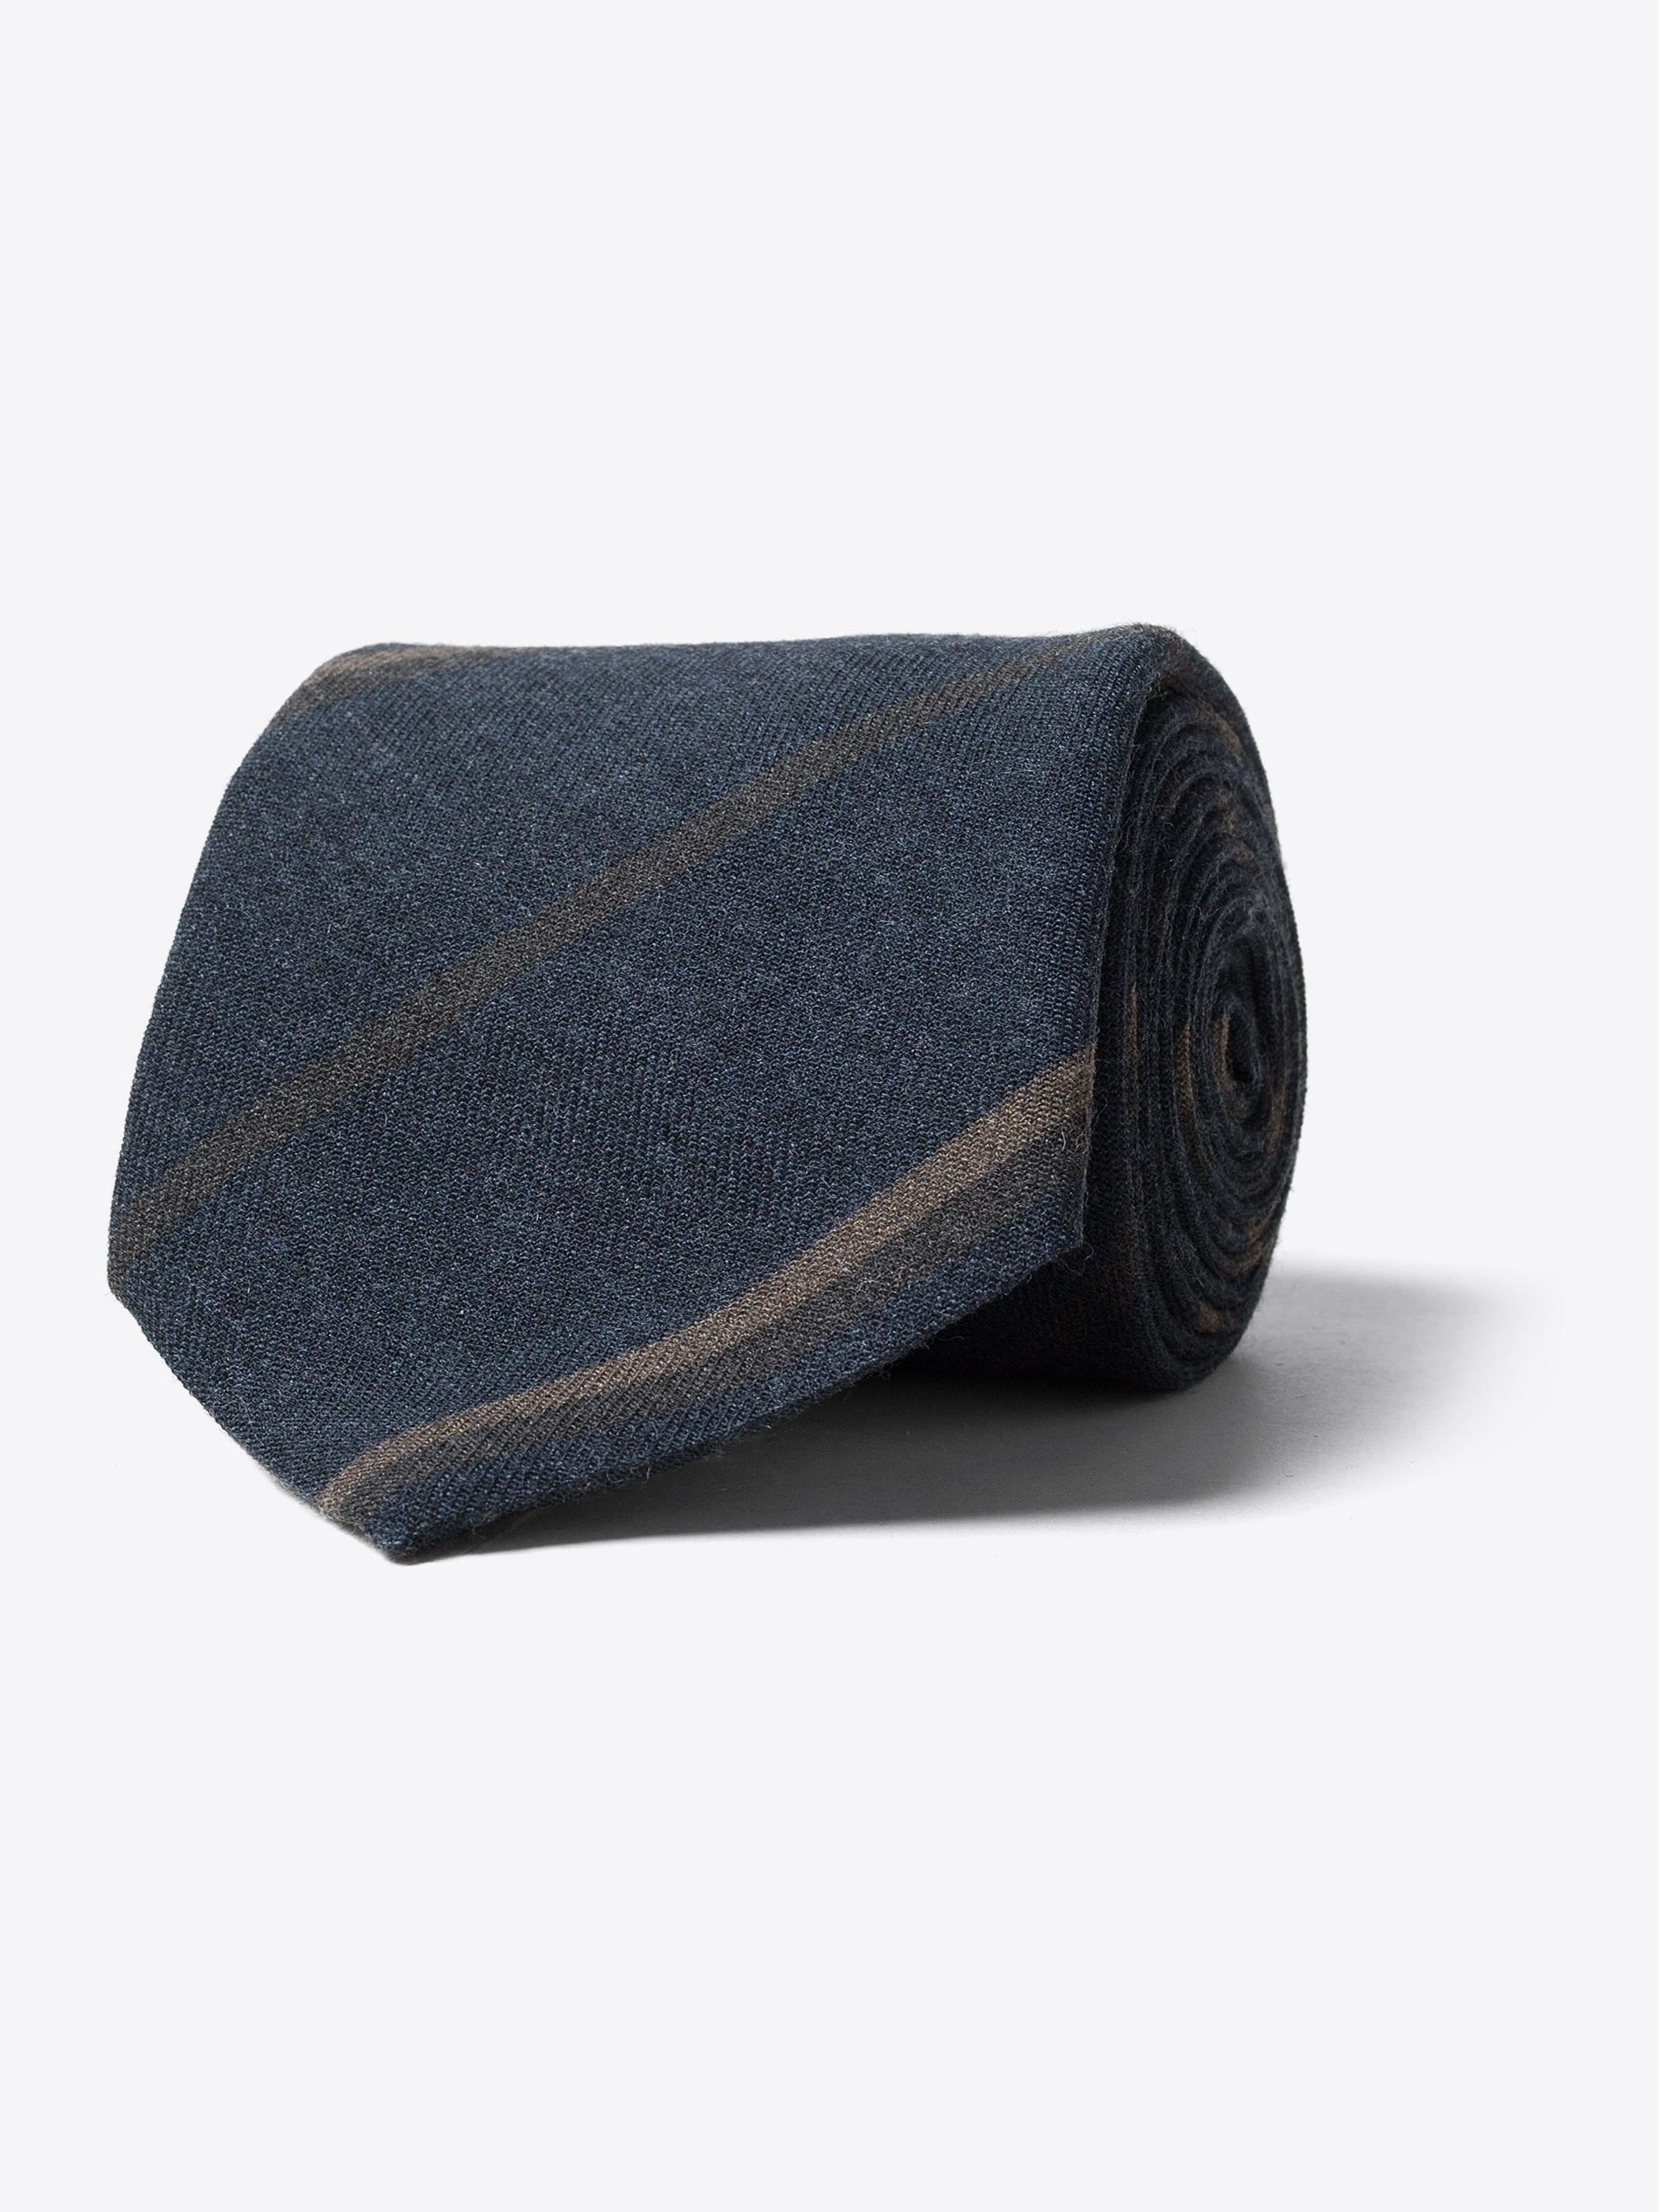 Zoom Image of Navy and Brown Striped Wool Tie